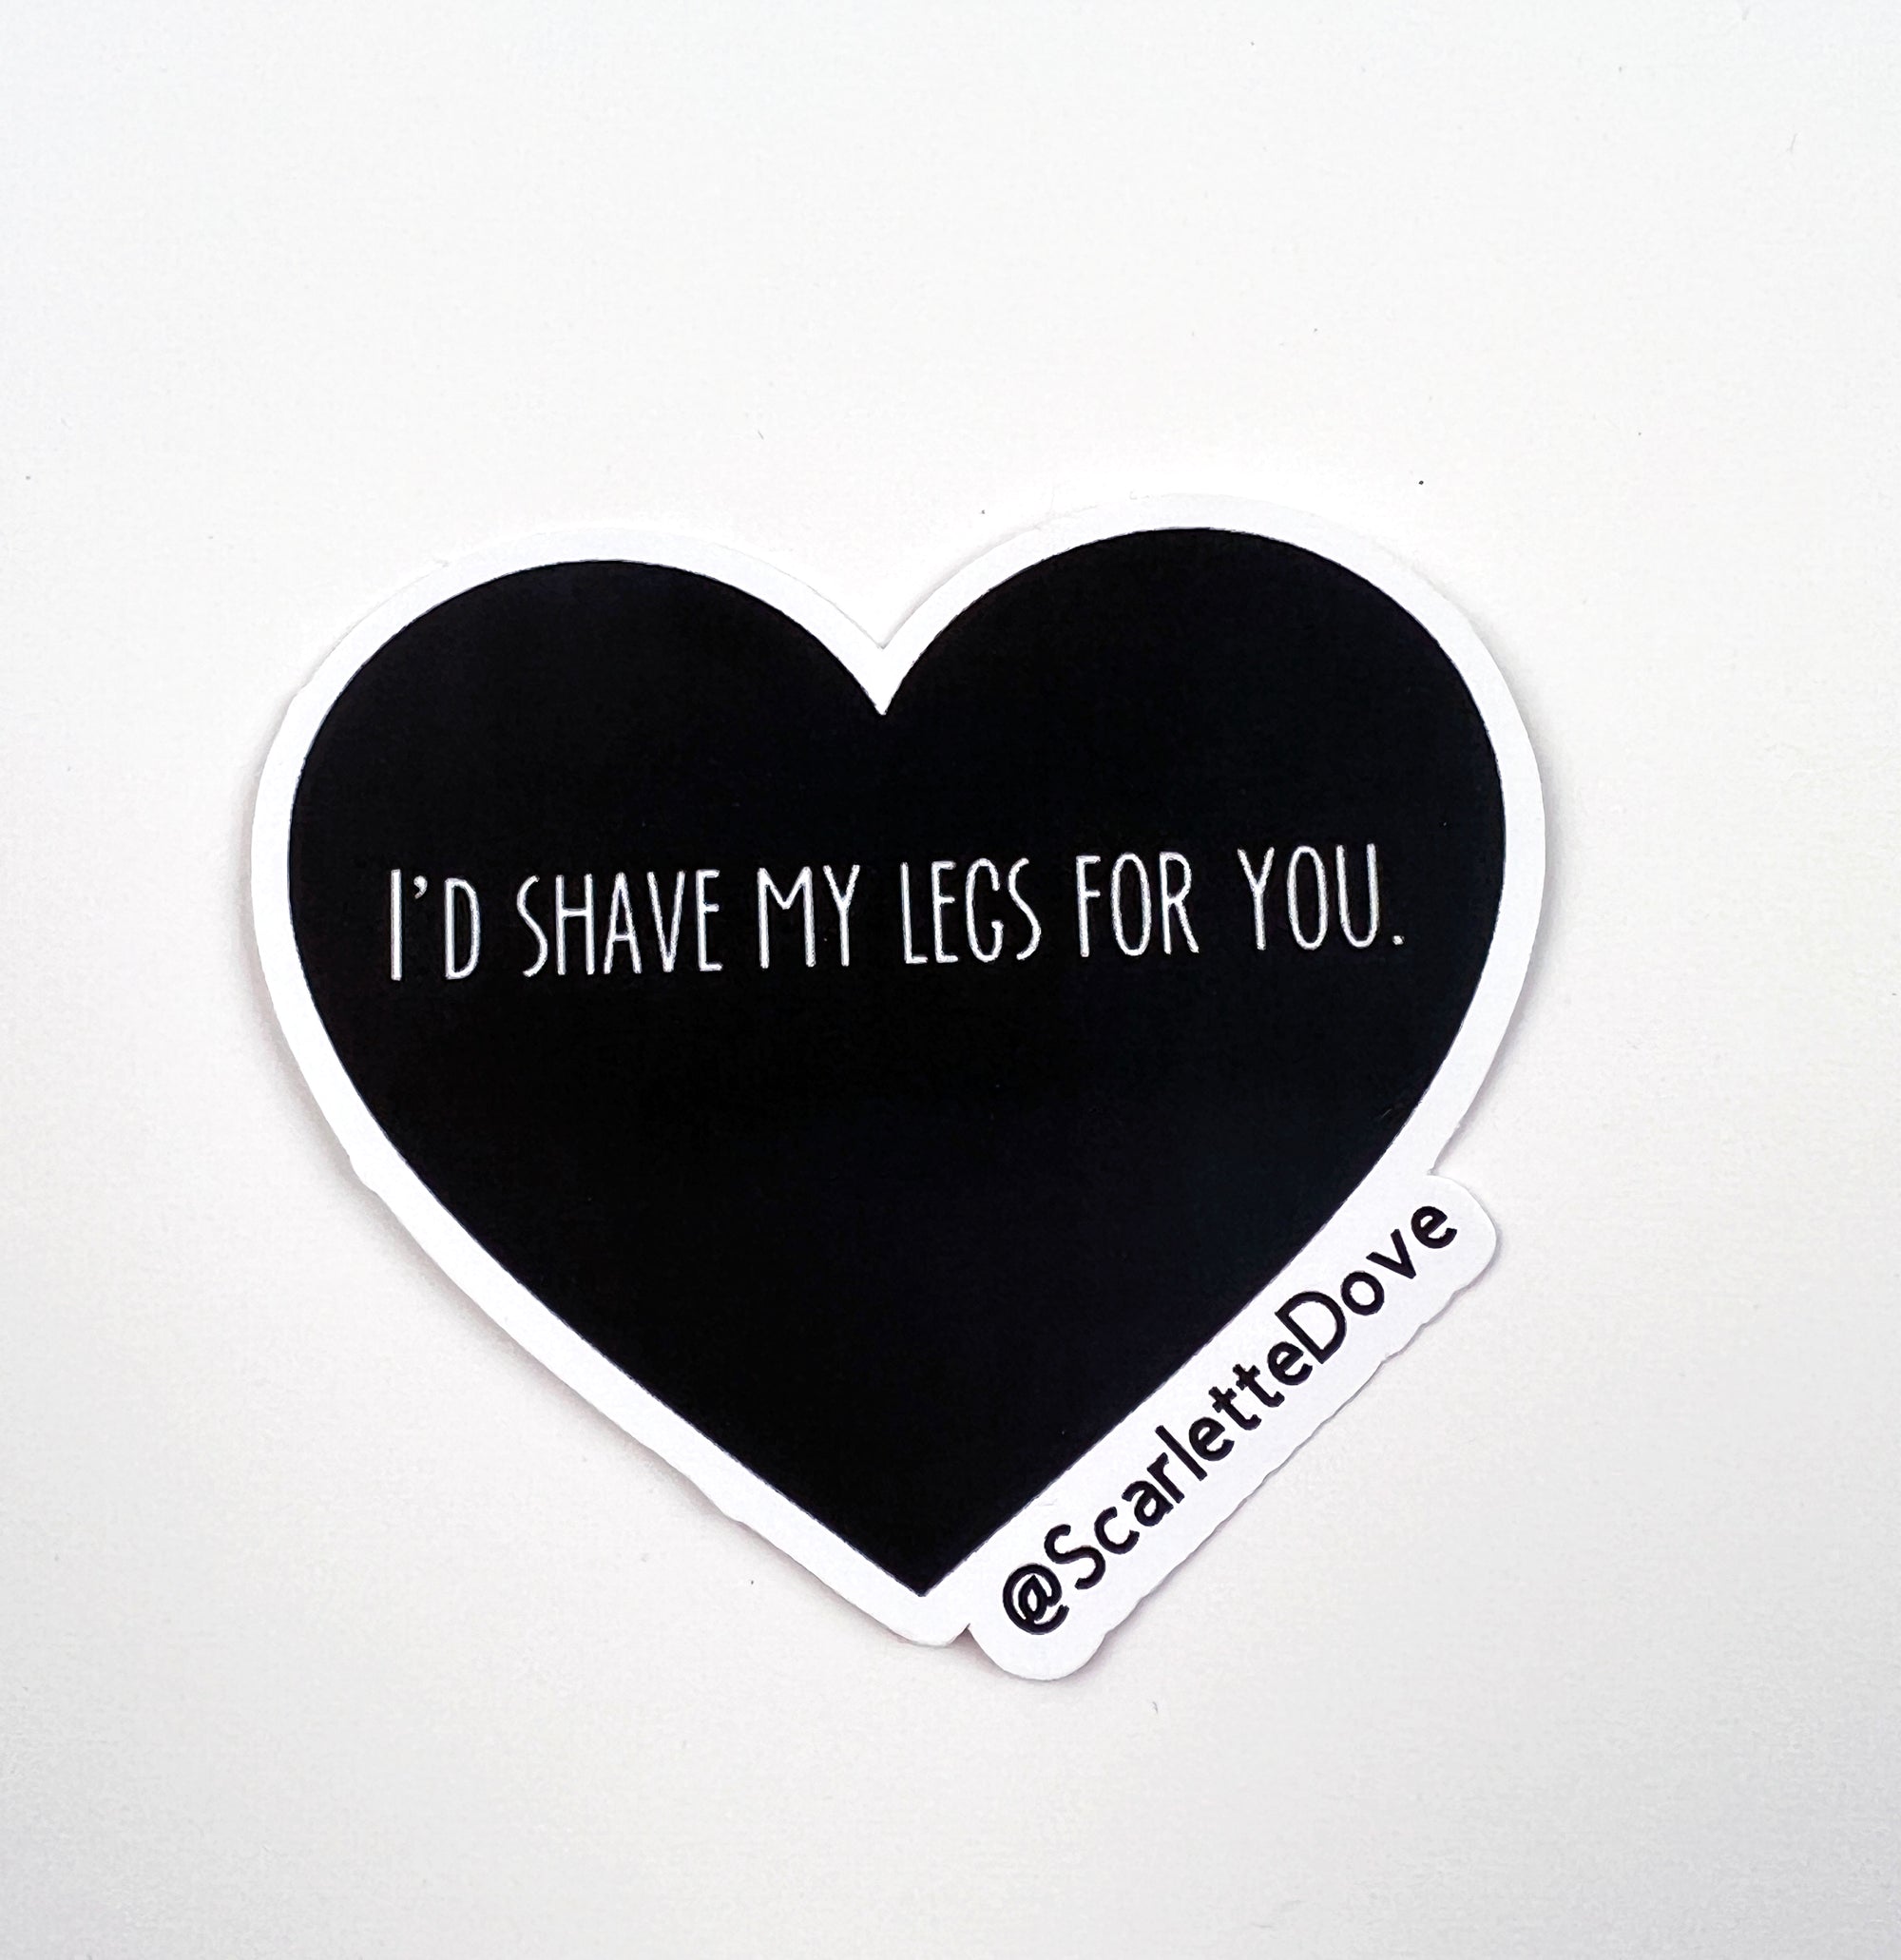 I'd Shave My Legs for You Black Heart Sticker